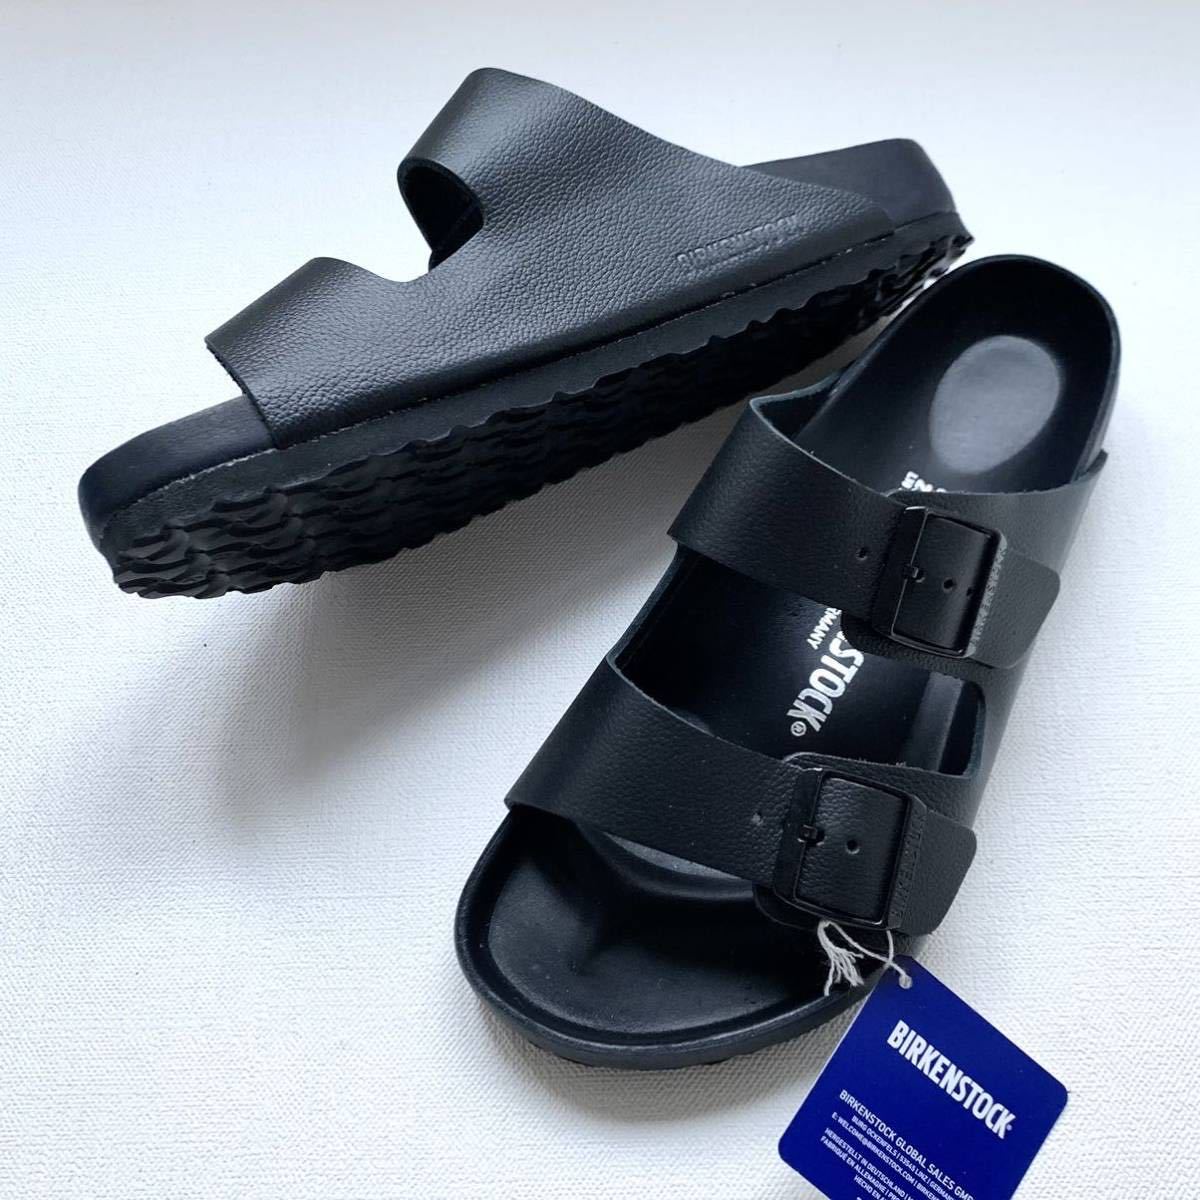  new goods Birkenstock have zonaekskijitoExquisite natural leather sandals 43.2.5 ten thousand 28. black all black free shipping 